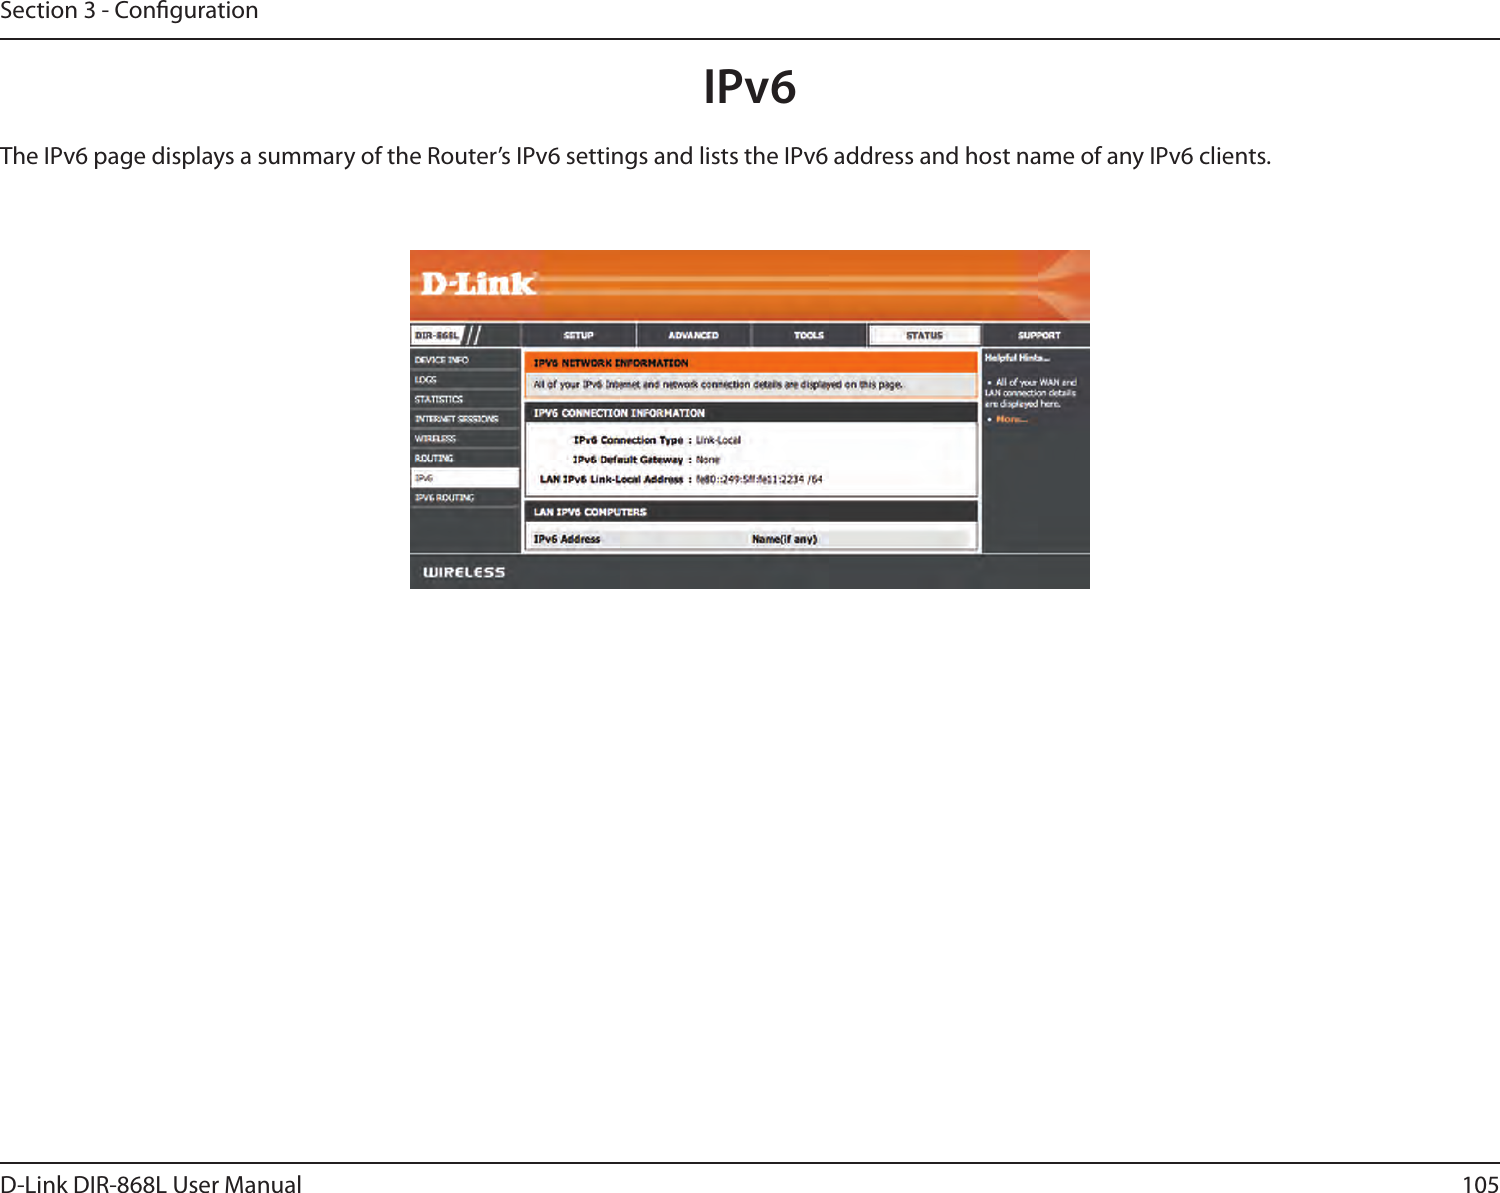 105D-Link DIR-868L User ManualSection 3 - CongurationIPv6The IPv6 page displays a summary of the Router’s IPv6 settings and lists the IPv6 address and host name of any IPv6 clients. 